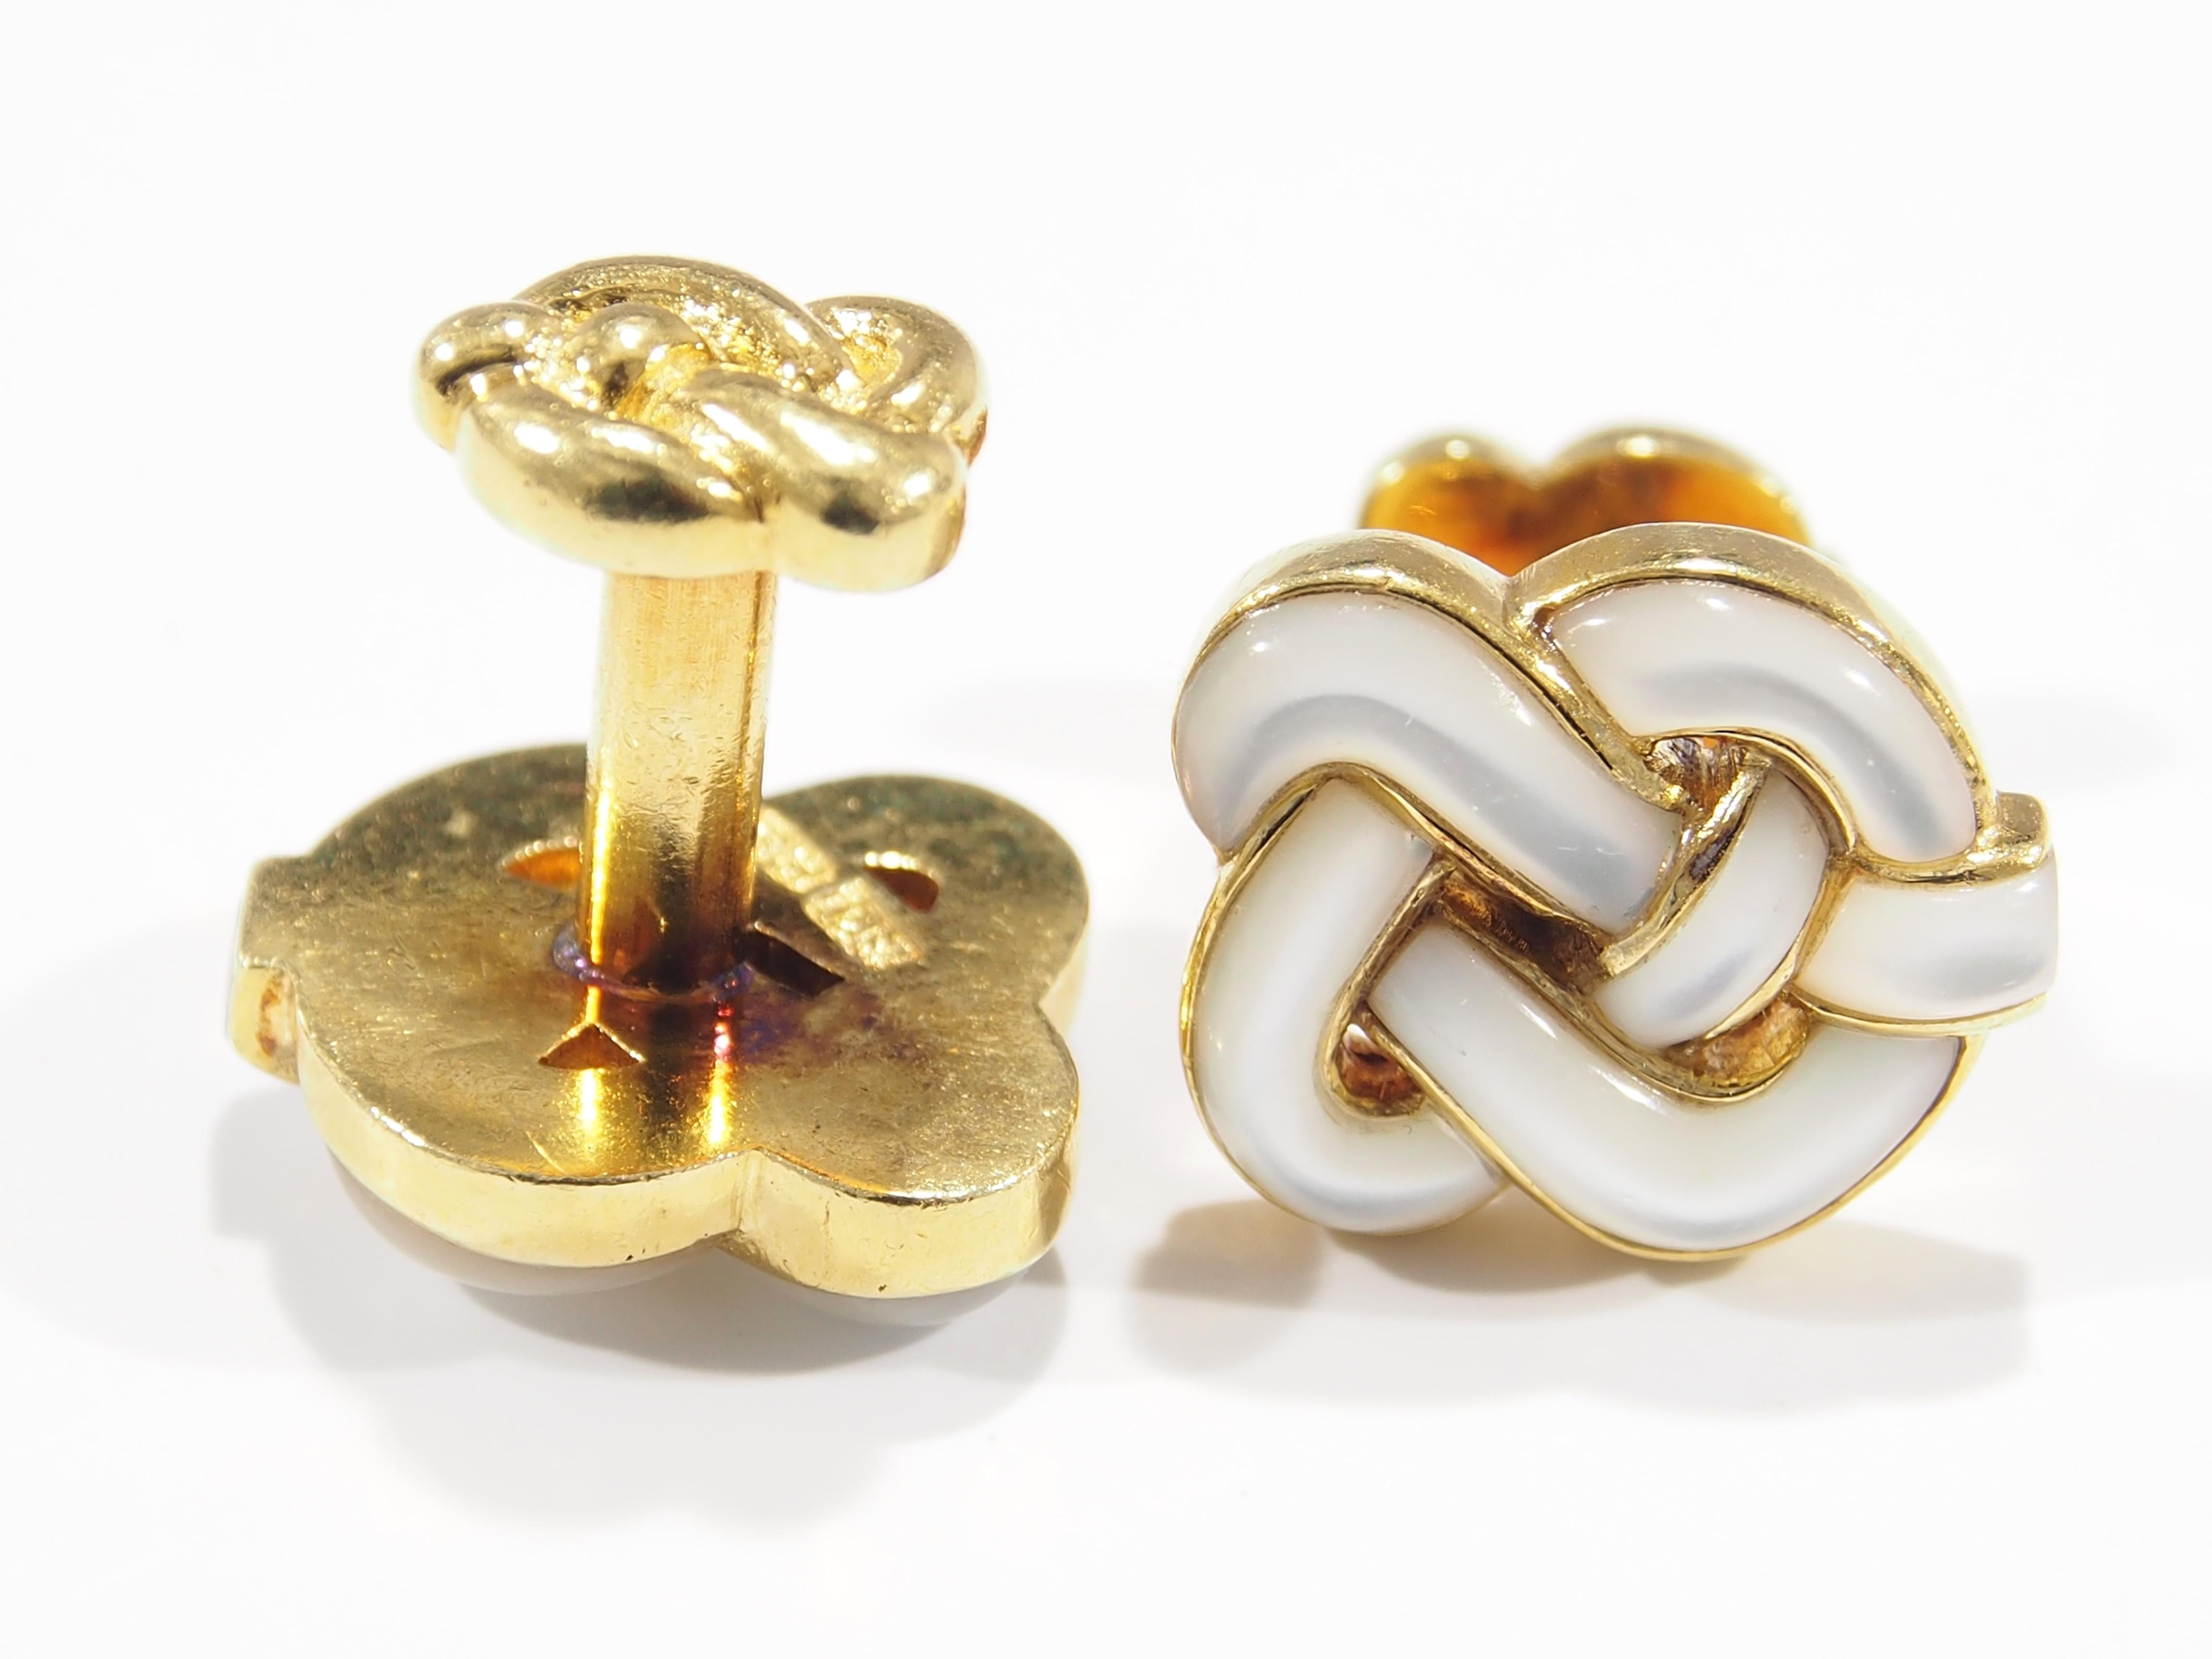 These are 18K Yellow Gold Cuff links designed by Angela Cumming with stunning  Mother of Pearl detail. The Mother of Pearl is  fashioned in a stunning detailed Nautical Knot Motif. The Cuff links are 3/4 inch in length, 5/8 inch in width, are